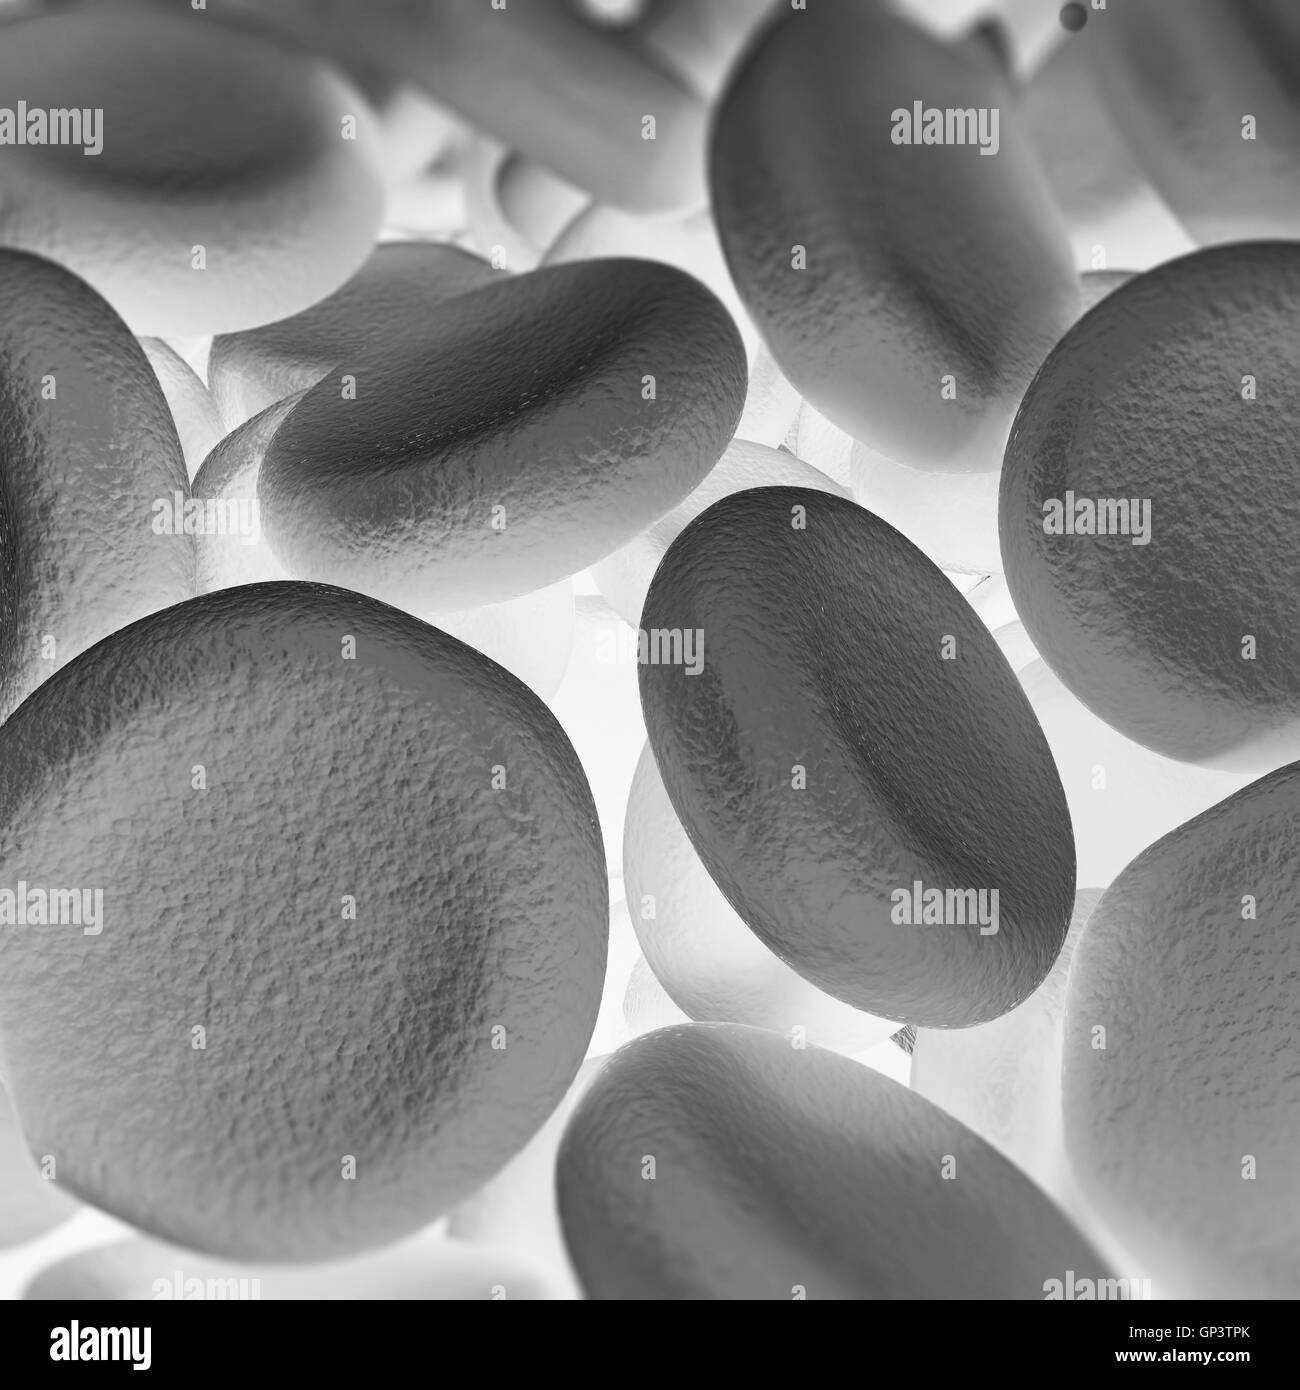 Blood cells, medical or microbiological background with depth of field. 3d illustration Stock Photo